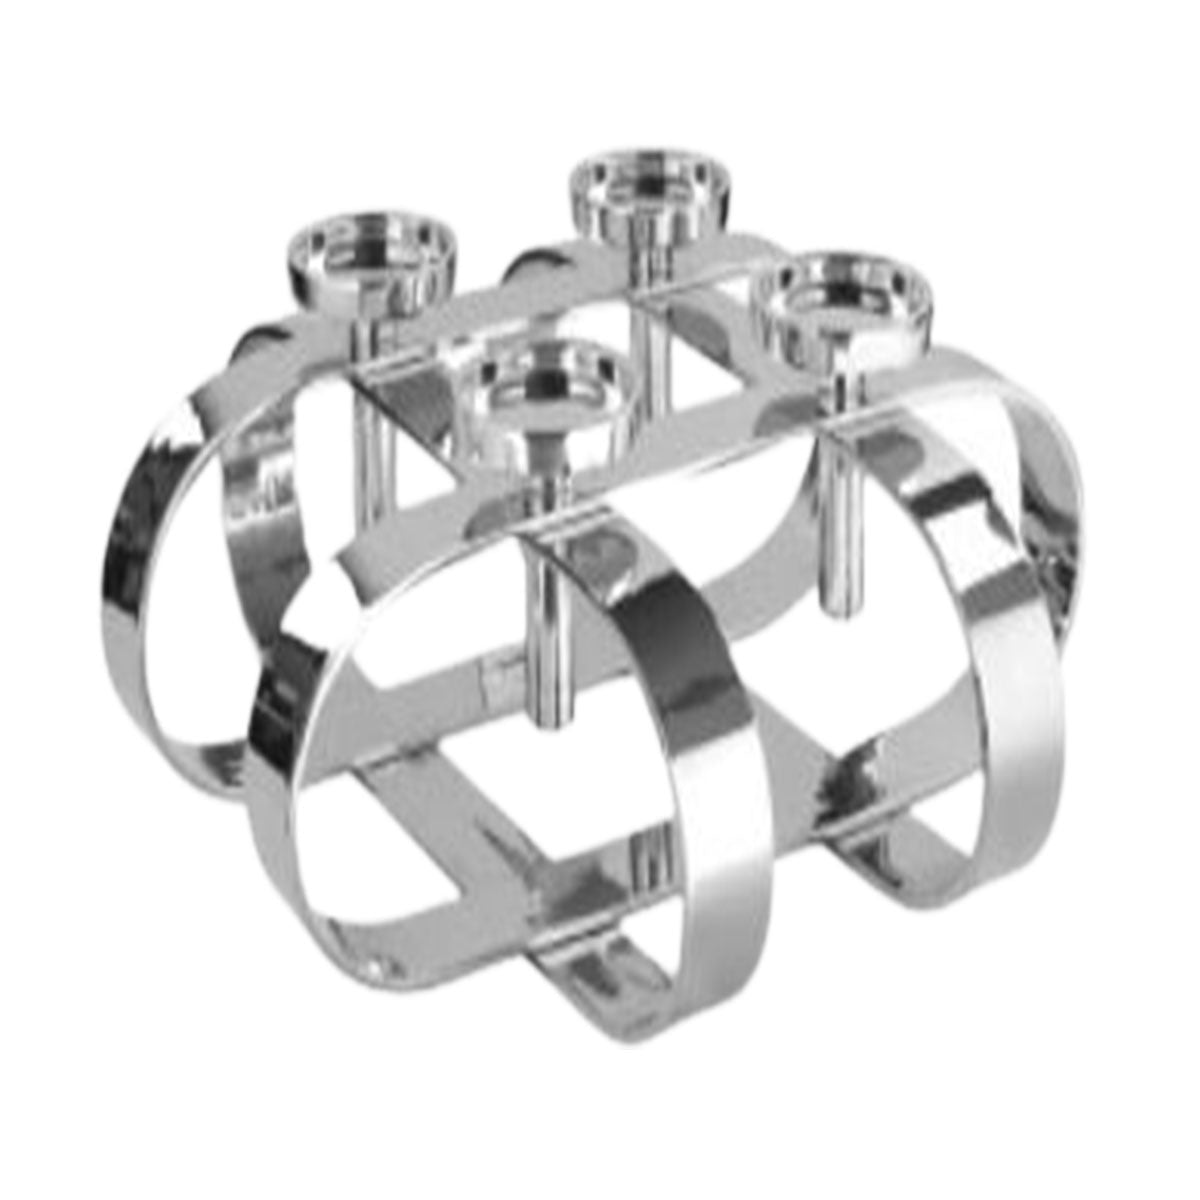 Large Square Nickel Plated Candle Holder